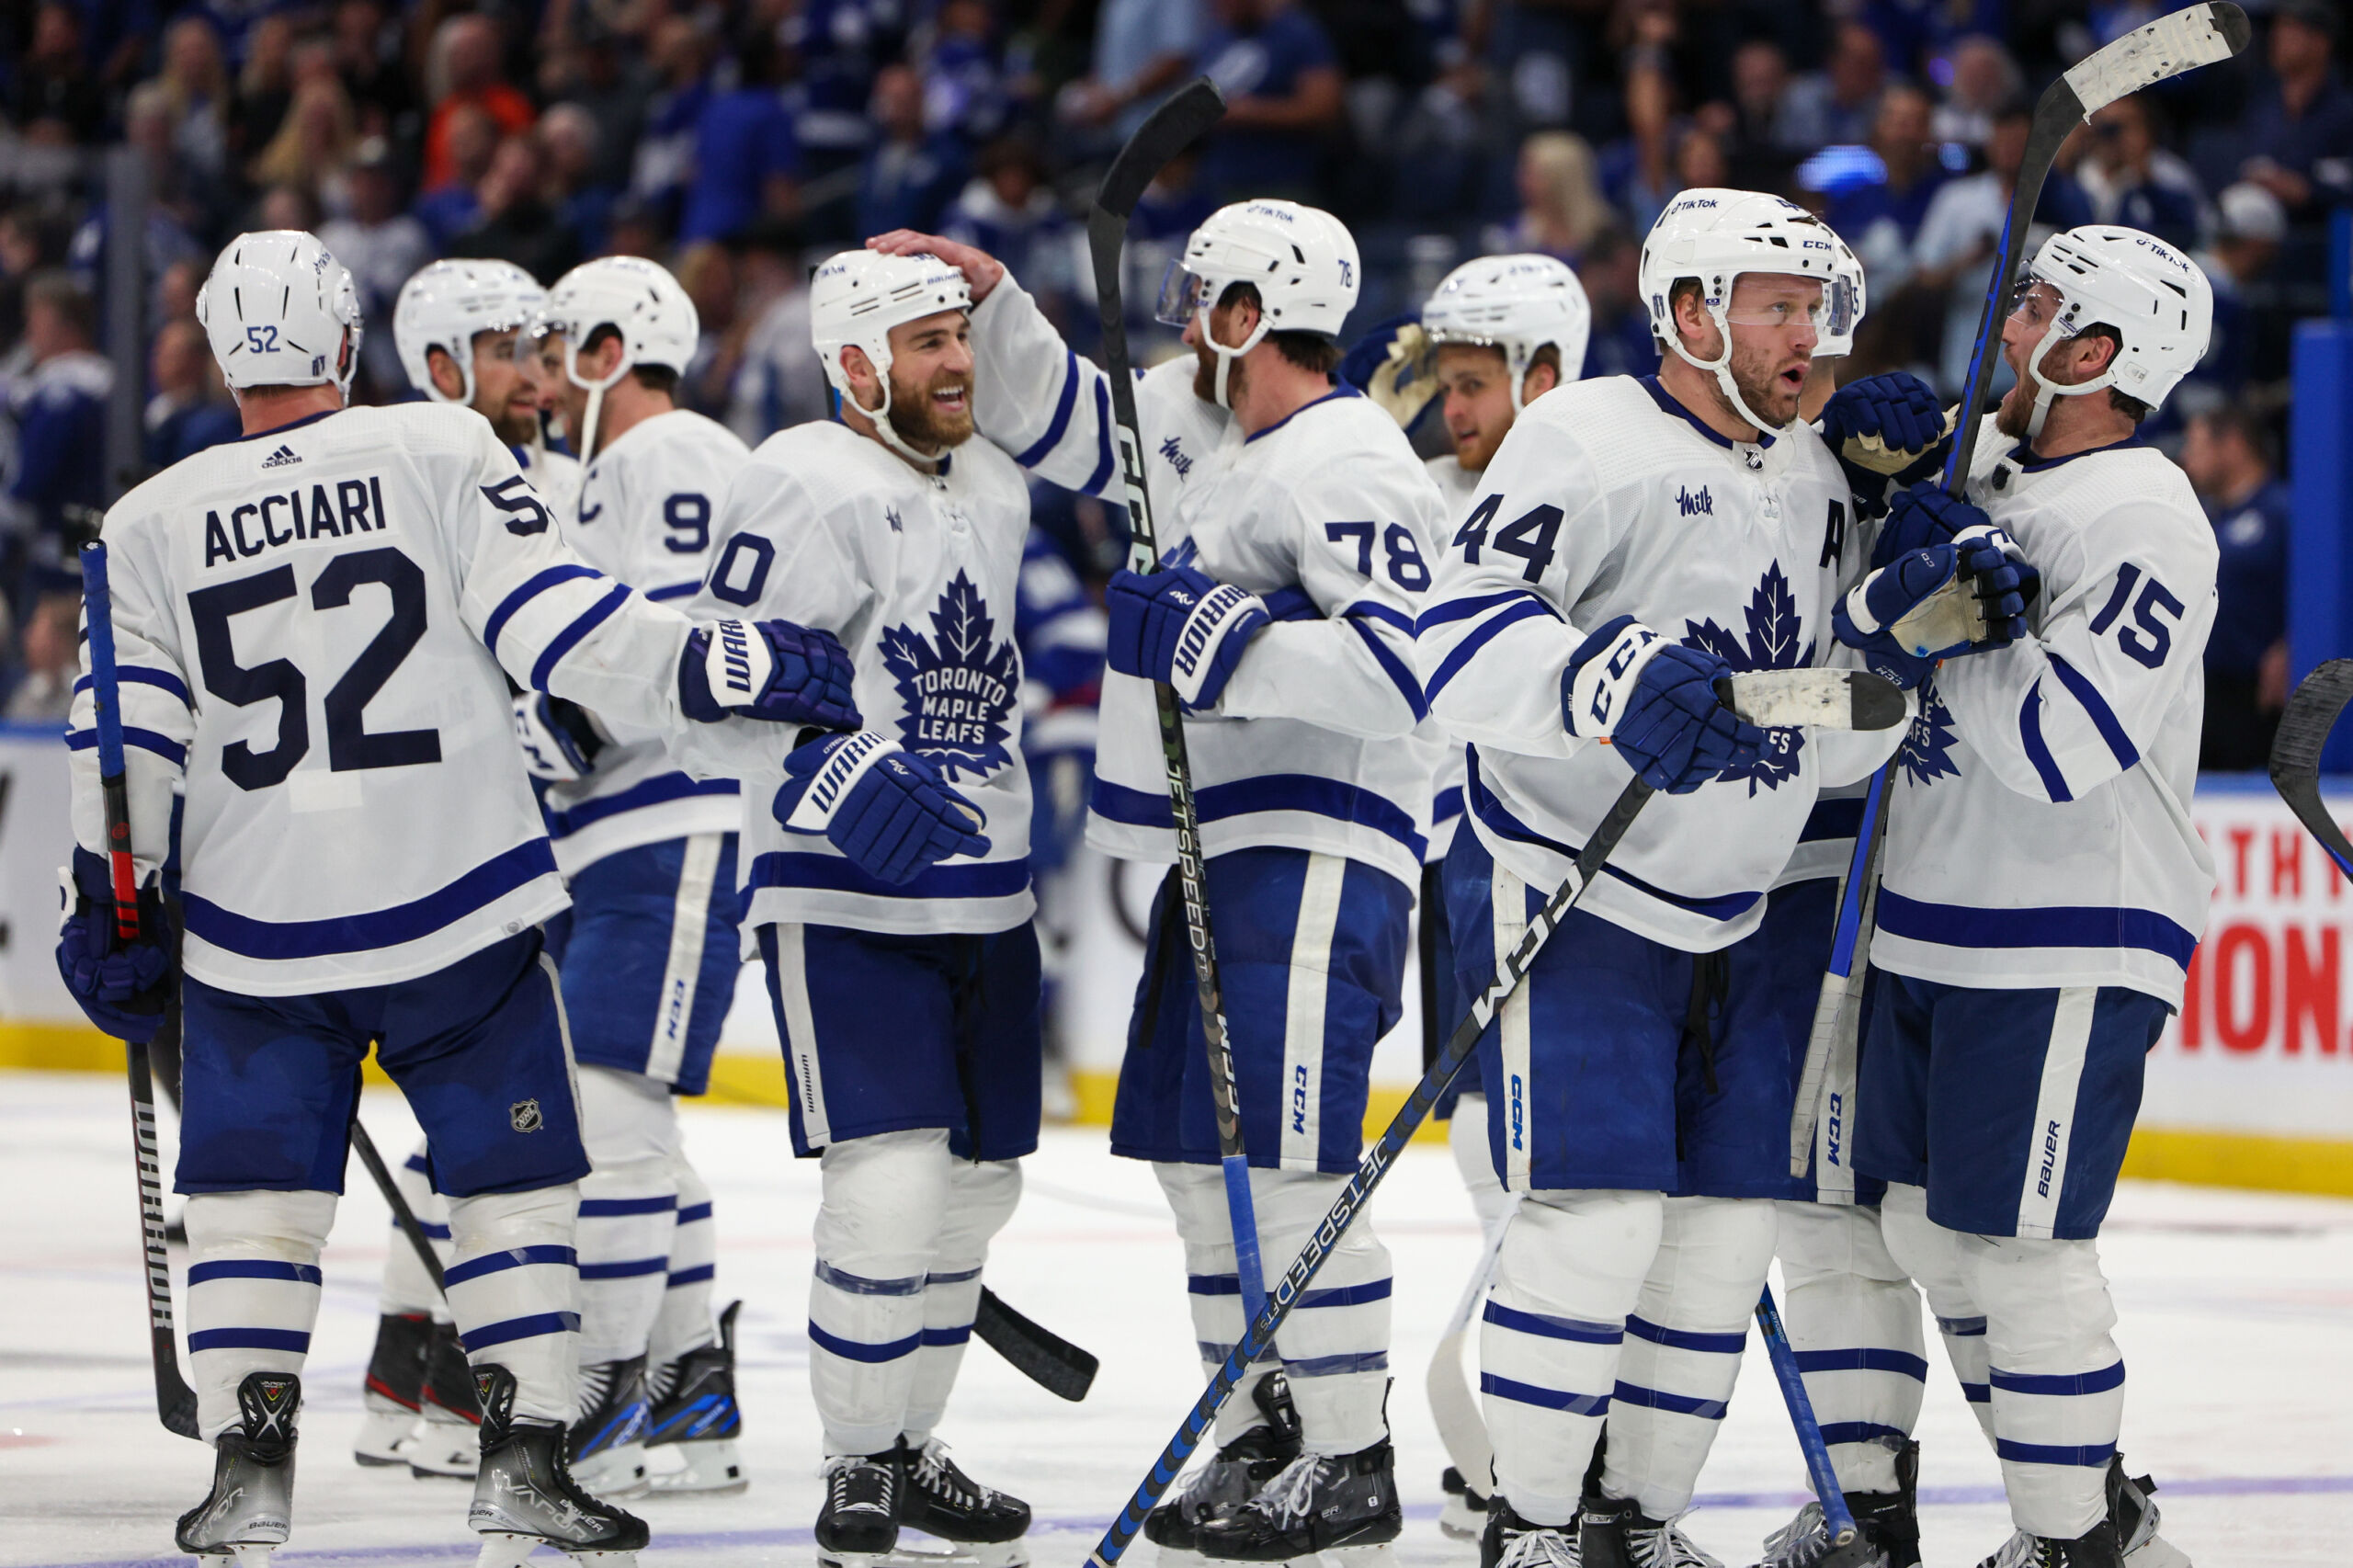 Toronto Maple Leafs: He's No Gritty But We Love him